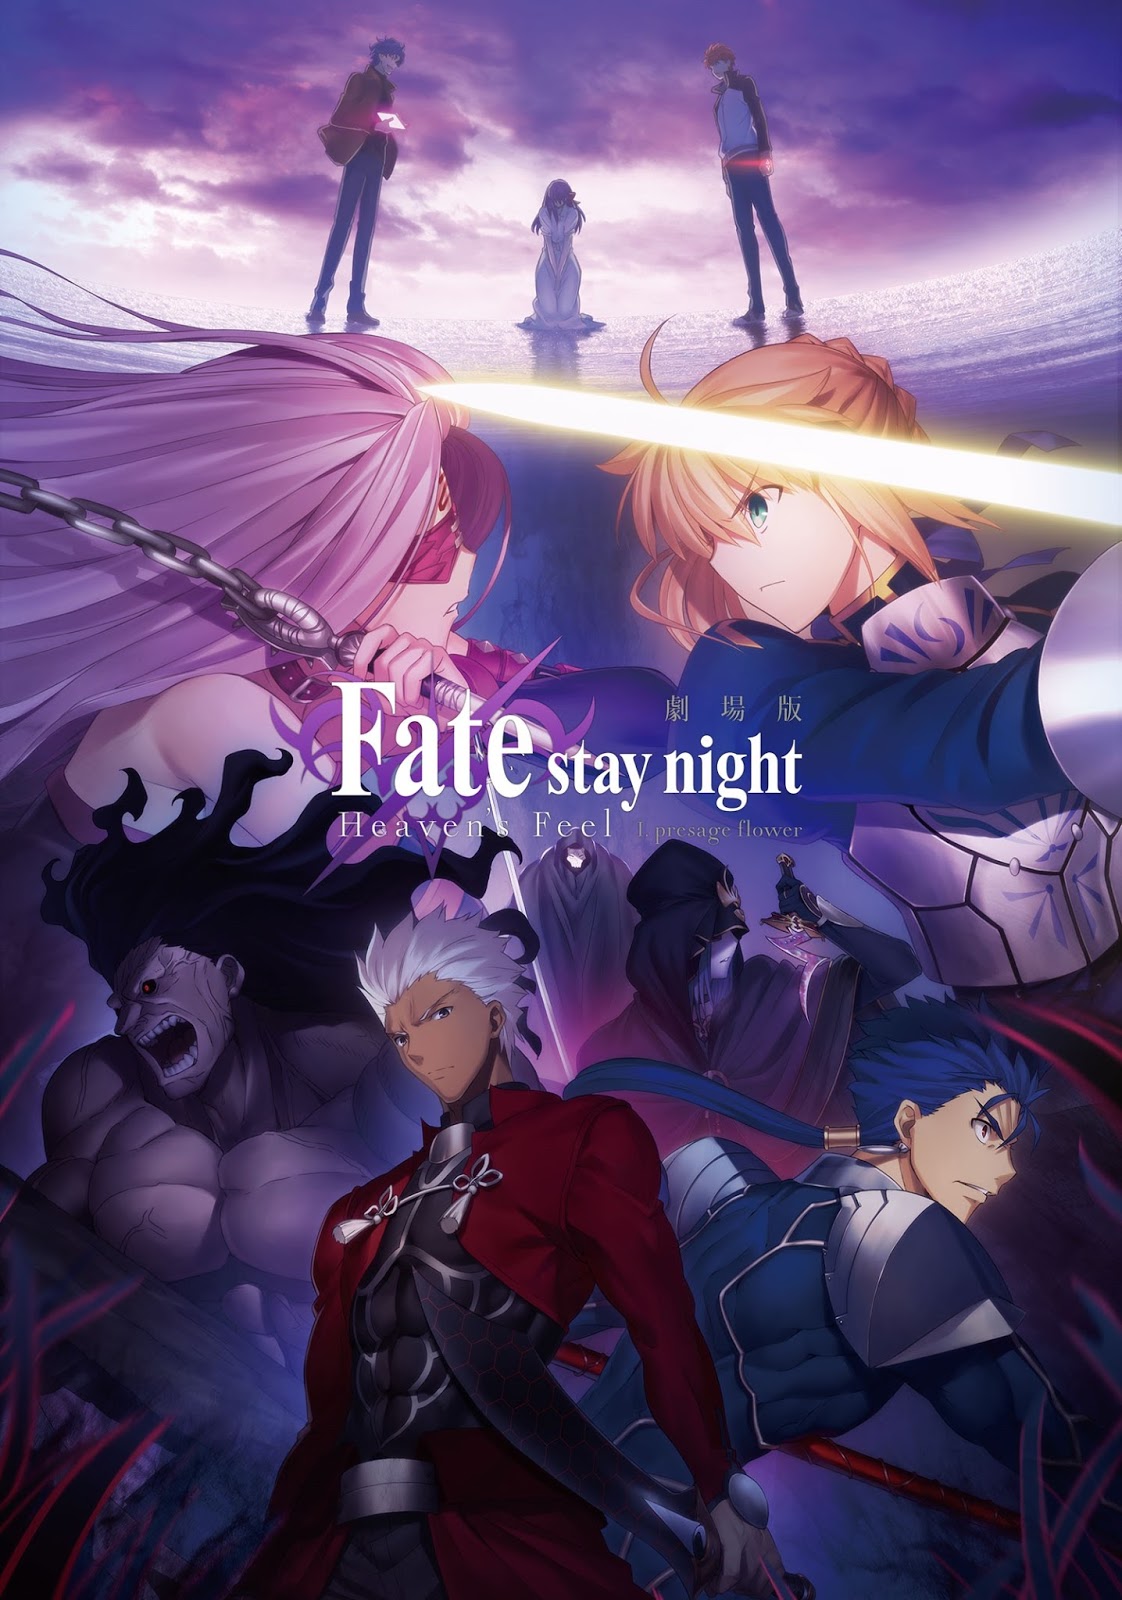 Pennsylvasia More Theaters Announced For Fate Stay Night Heaven S Feel 1 2 劇場版 Fate Stay Night Heaven S Feel In Pittsburgh November 14